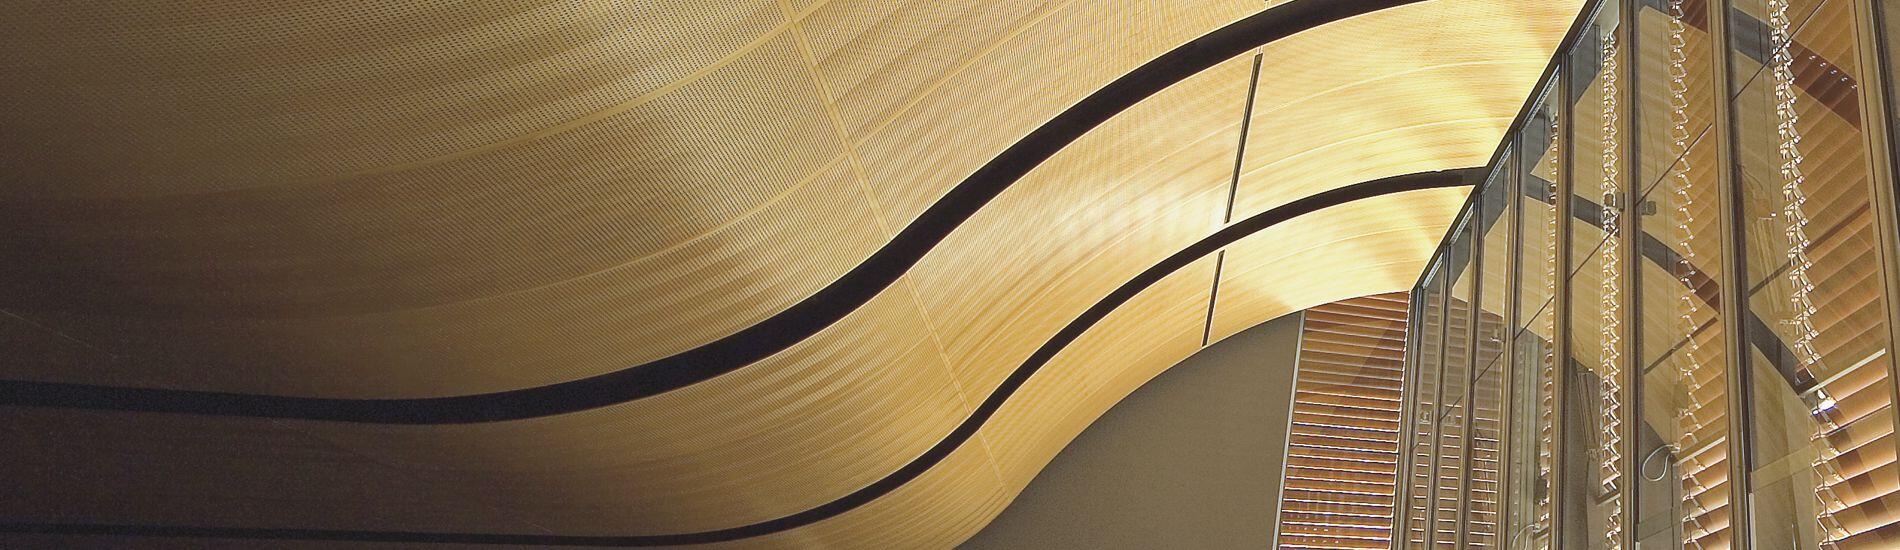 SUPACOUSTIC Curved Perforated Acoustic Ceiling Panels Enhance Restoration of Heritage Building